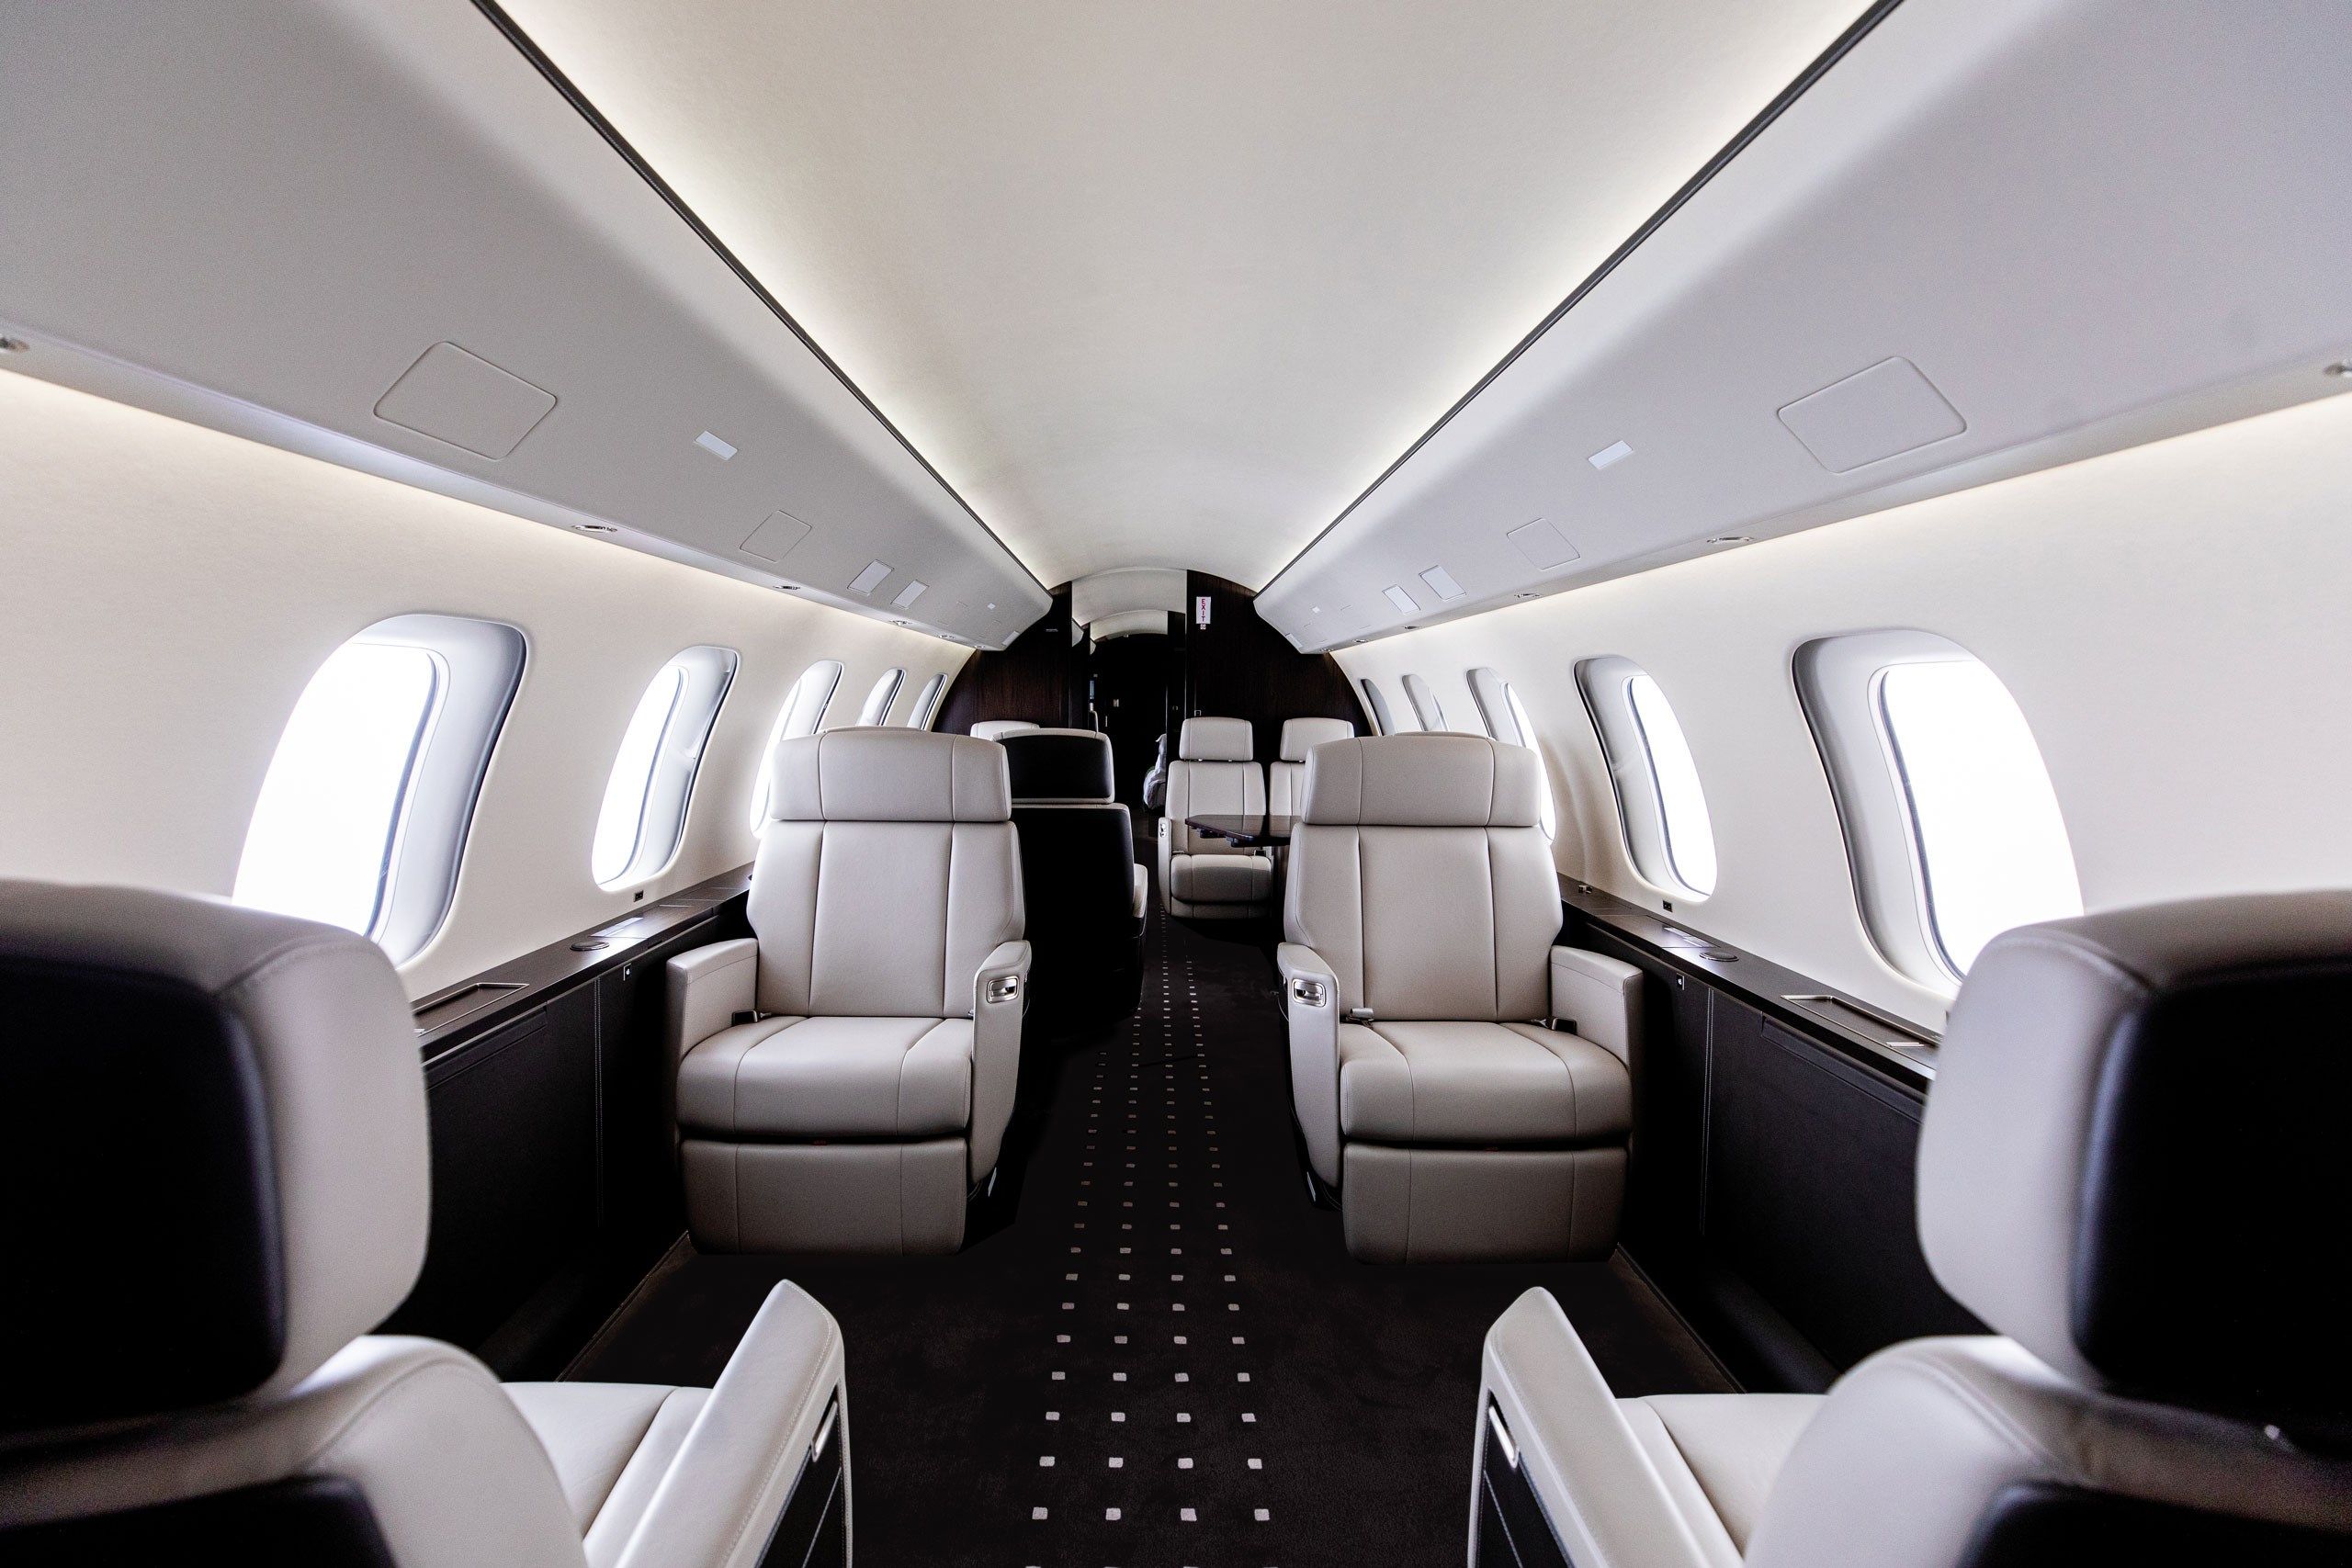 Private Jet Interior Wallpapers - Top Free Private Jet Interior ...